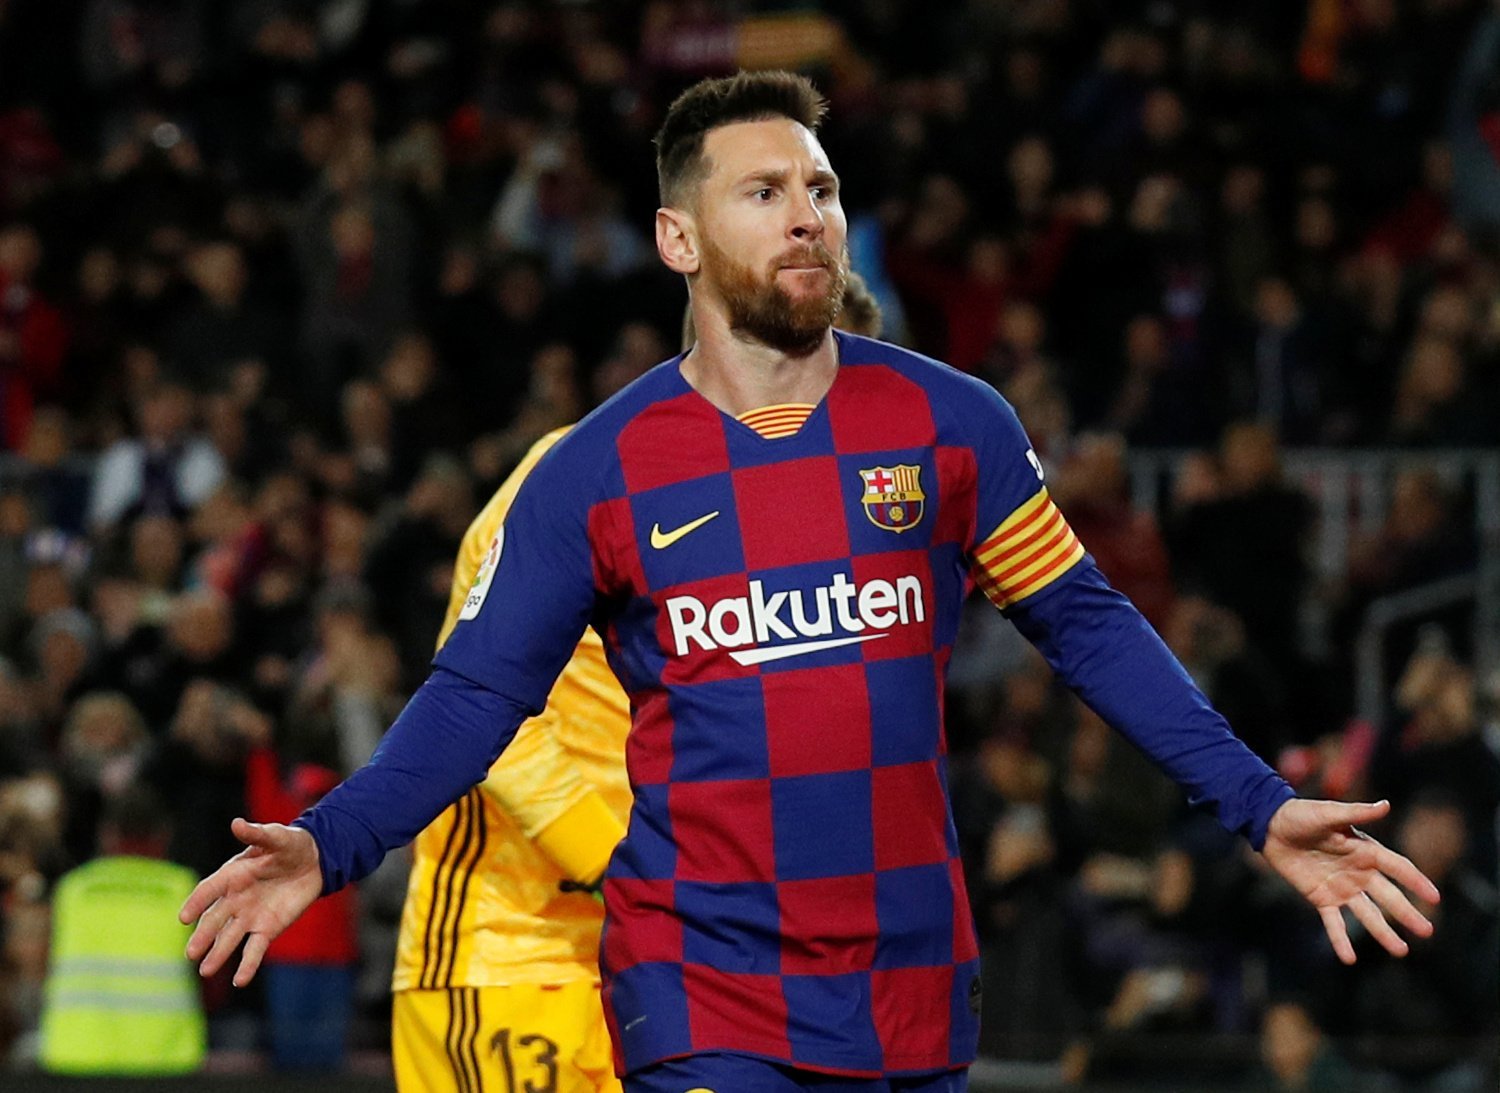 Jamie Carragher believes Manchester City will be the perfect destination of Messi instead of Liverpool